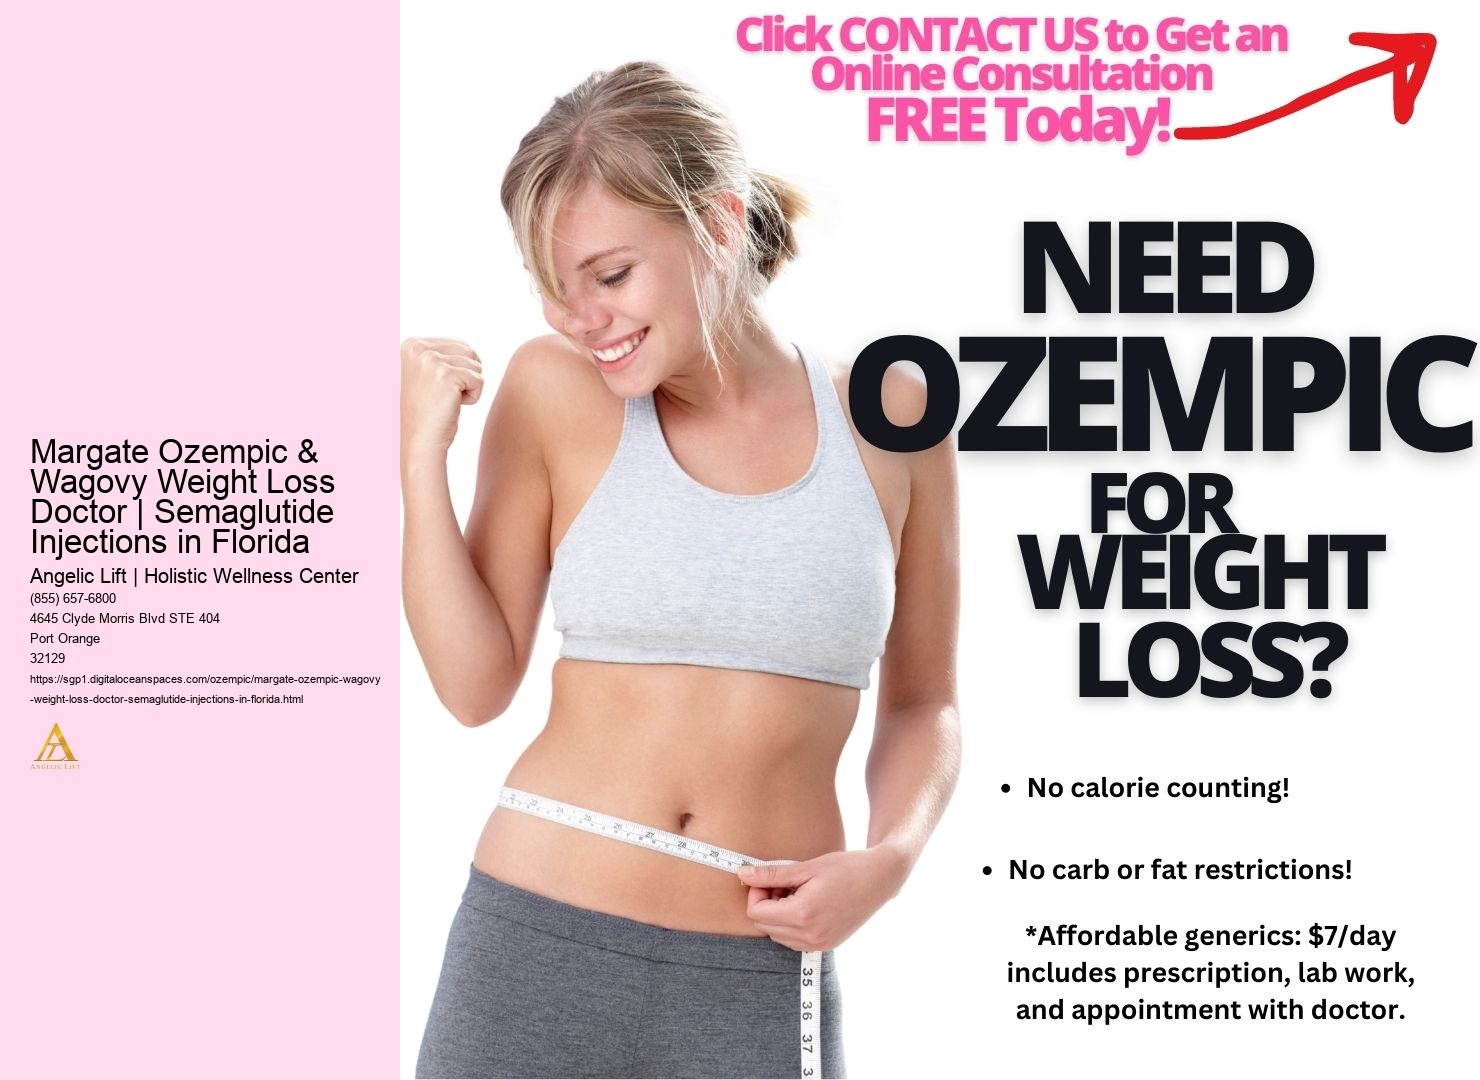 Margate Ozempic & Wagovy Weight Loss Doctor | Semaglutide Injections in Florida